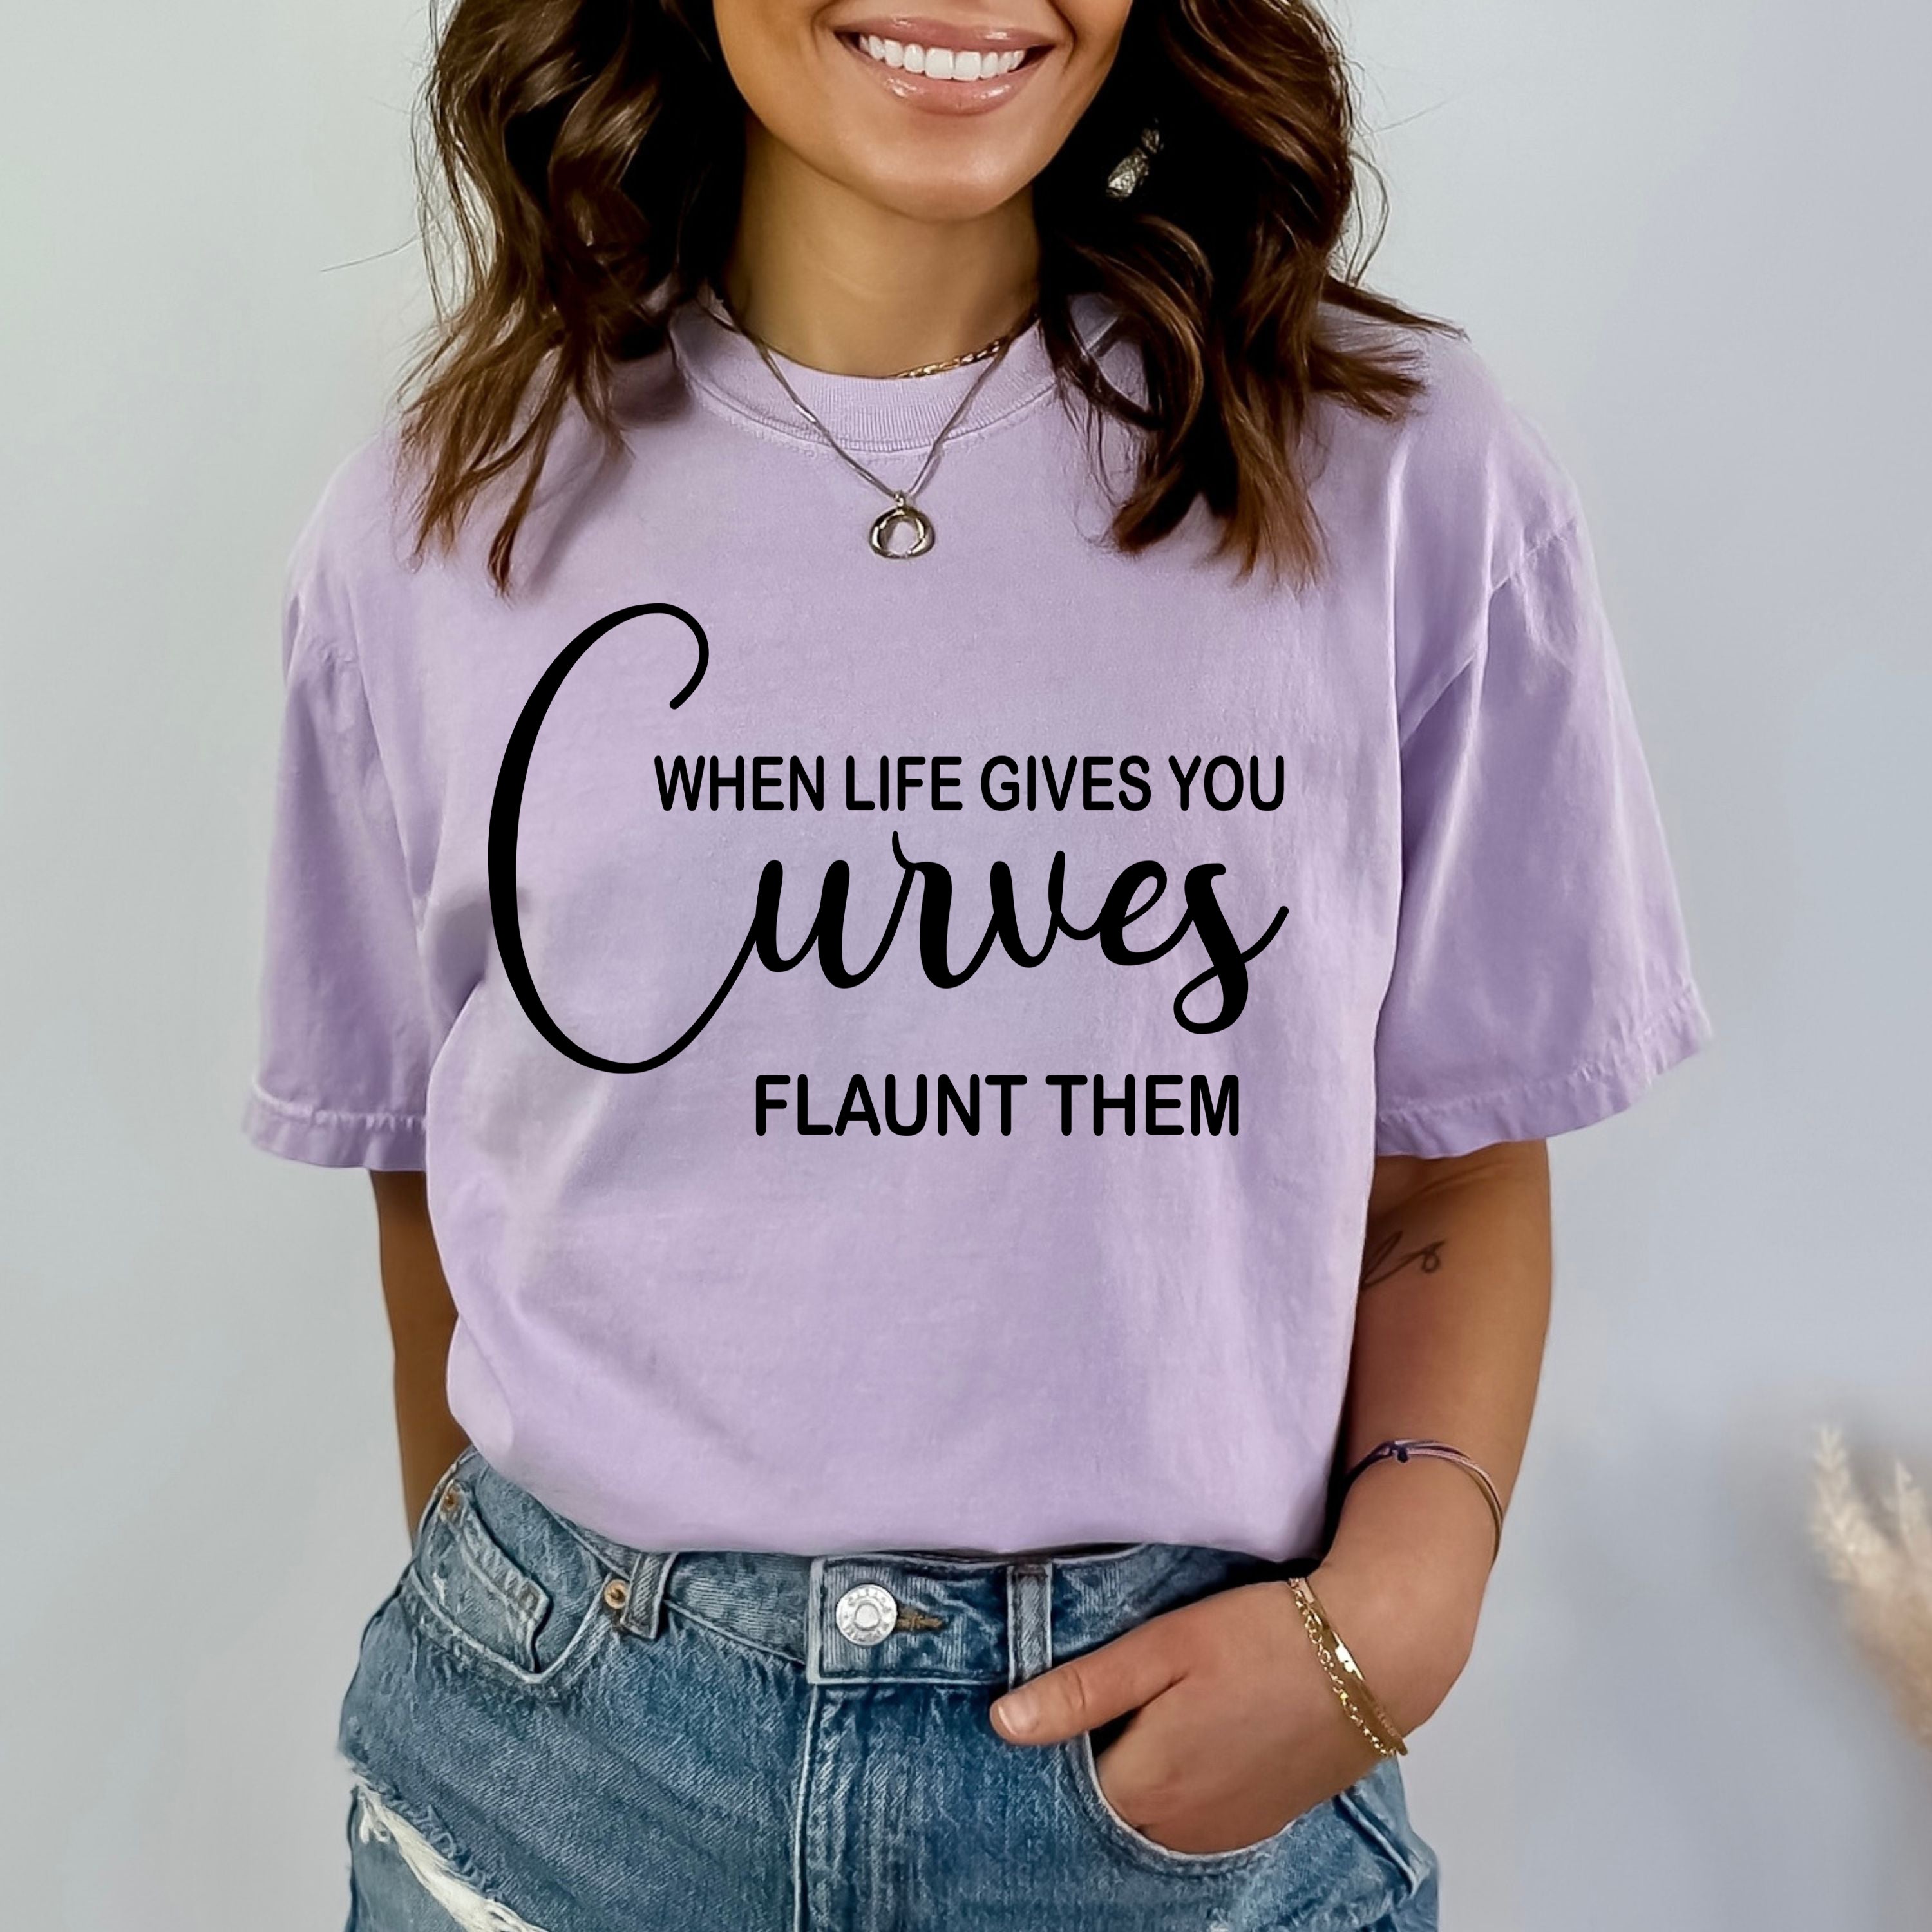 When Life Gives You Curves - Bella Canvas